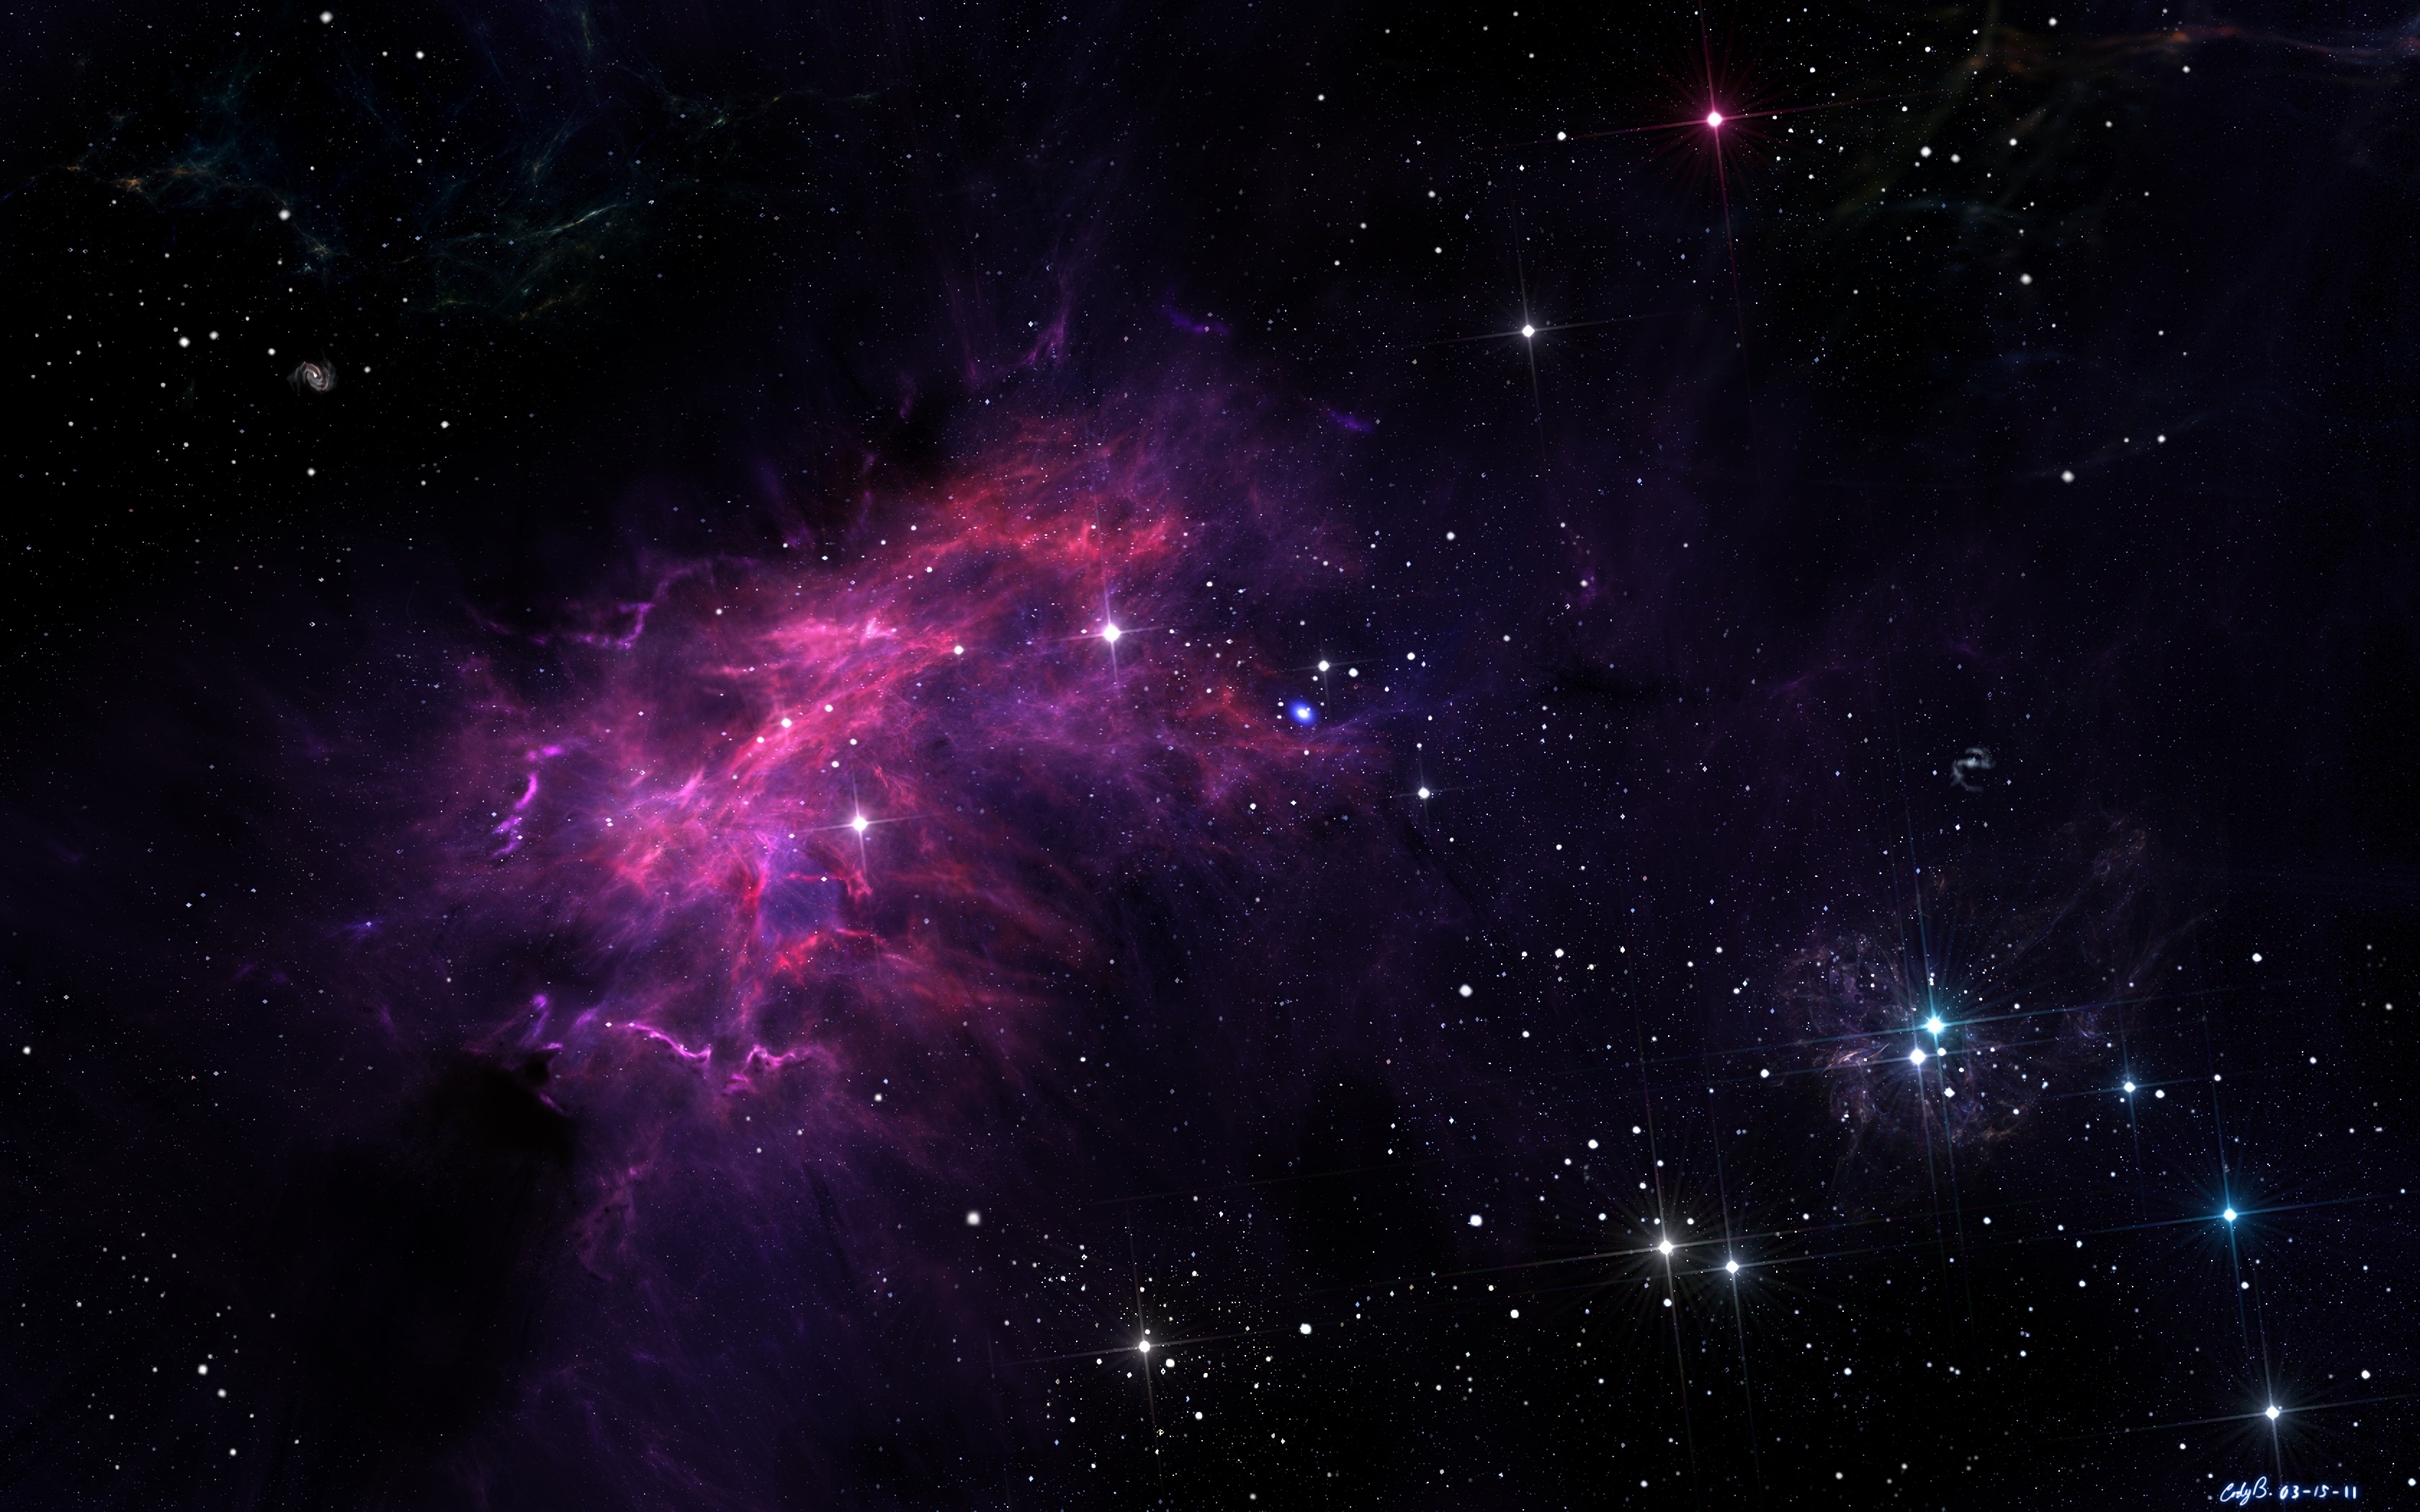 102695 download wallpaper galaxy, universe, stars, nebula screensavers and pictures for free